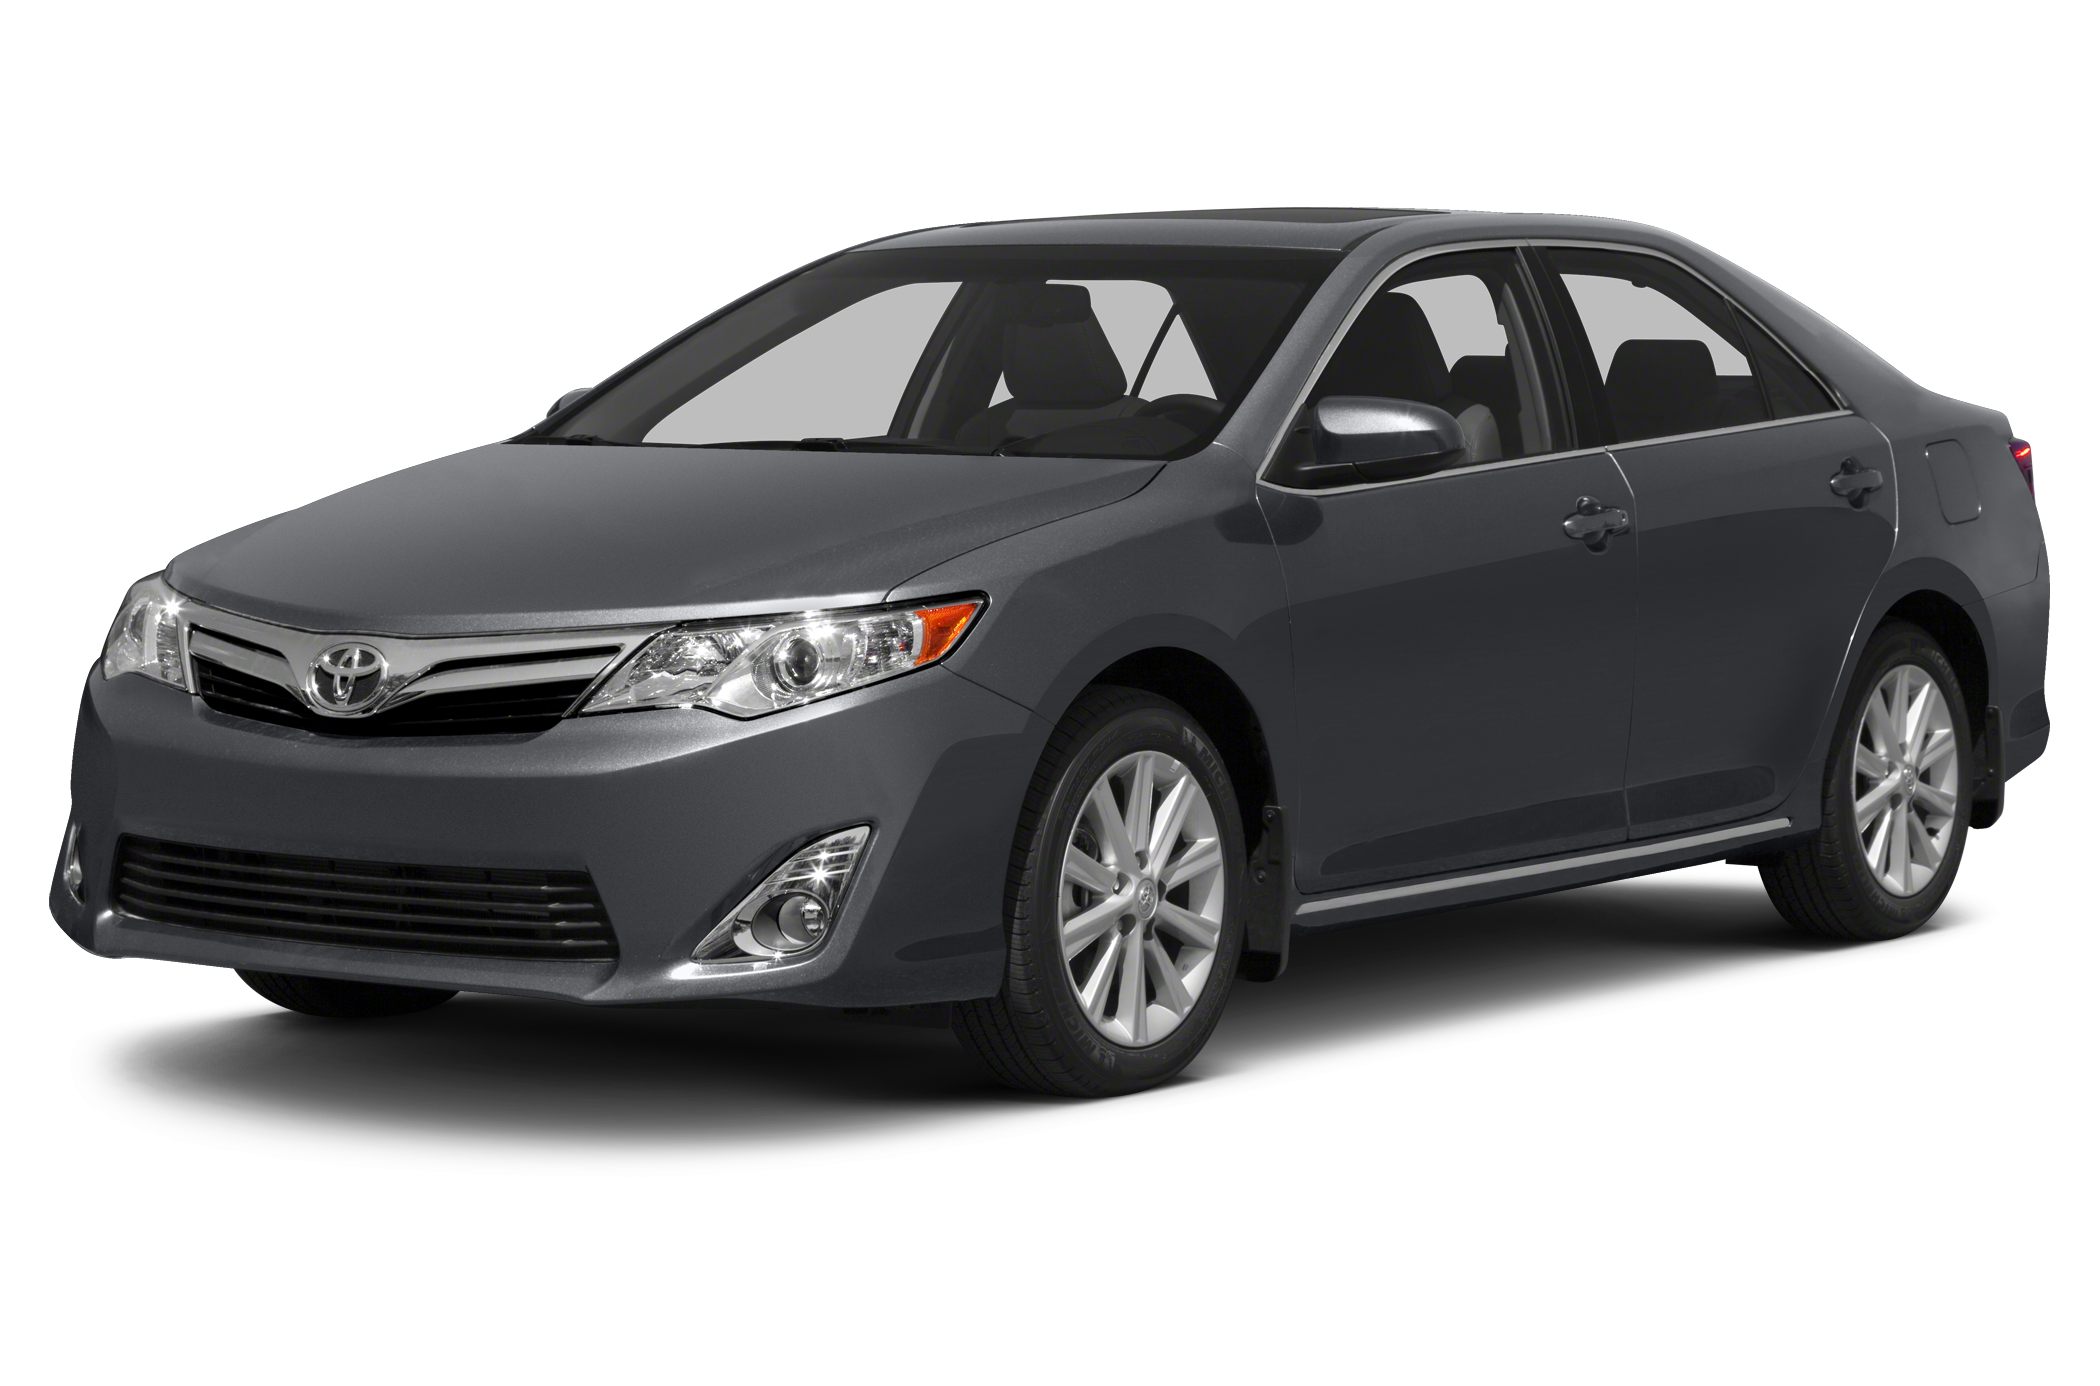 2014 Toyota Camry oem parts and accessories on sale